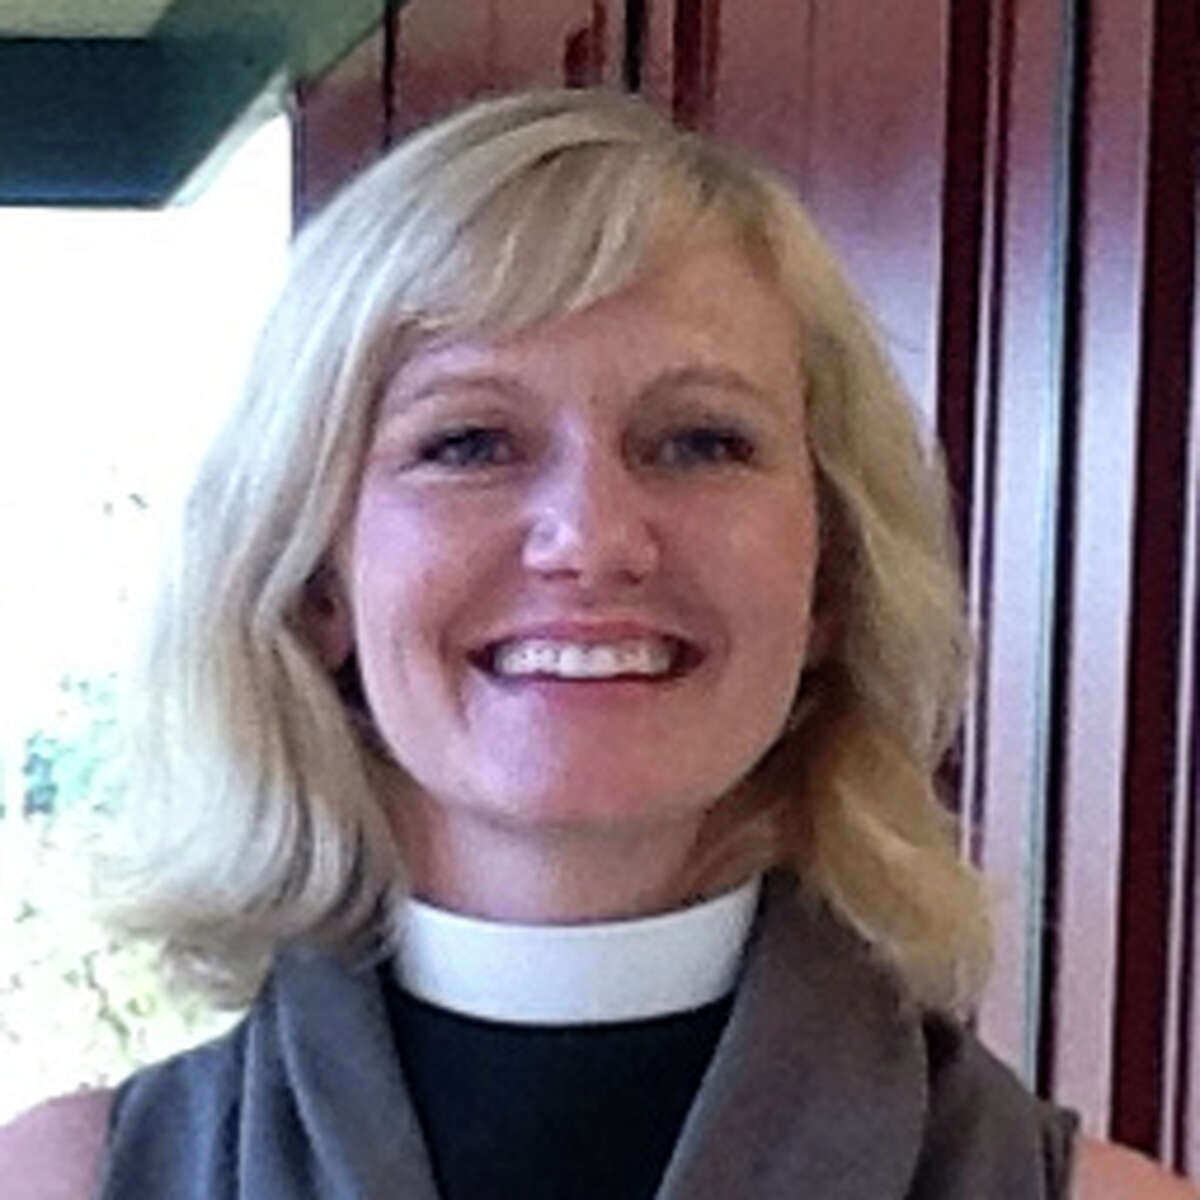 The Rev. Whitney Edwards has been appointed rector of Christ & Holy Trinity Church in Westport. Westport CT. December 2013.